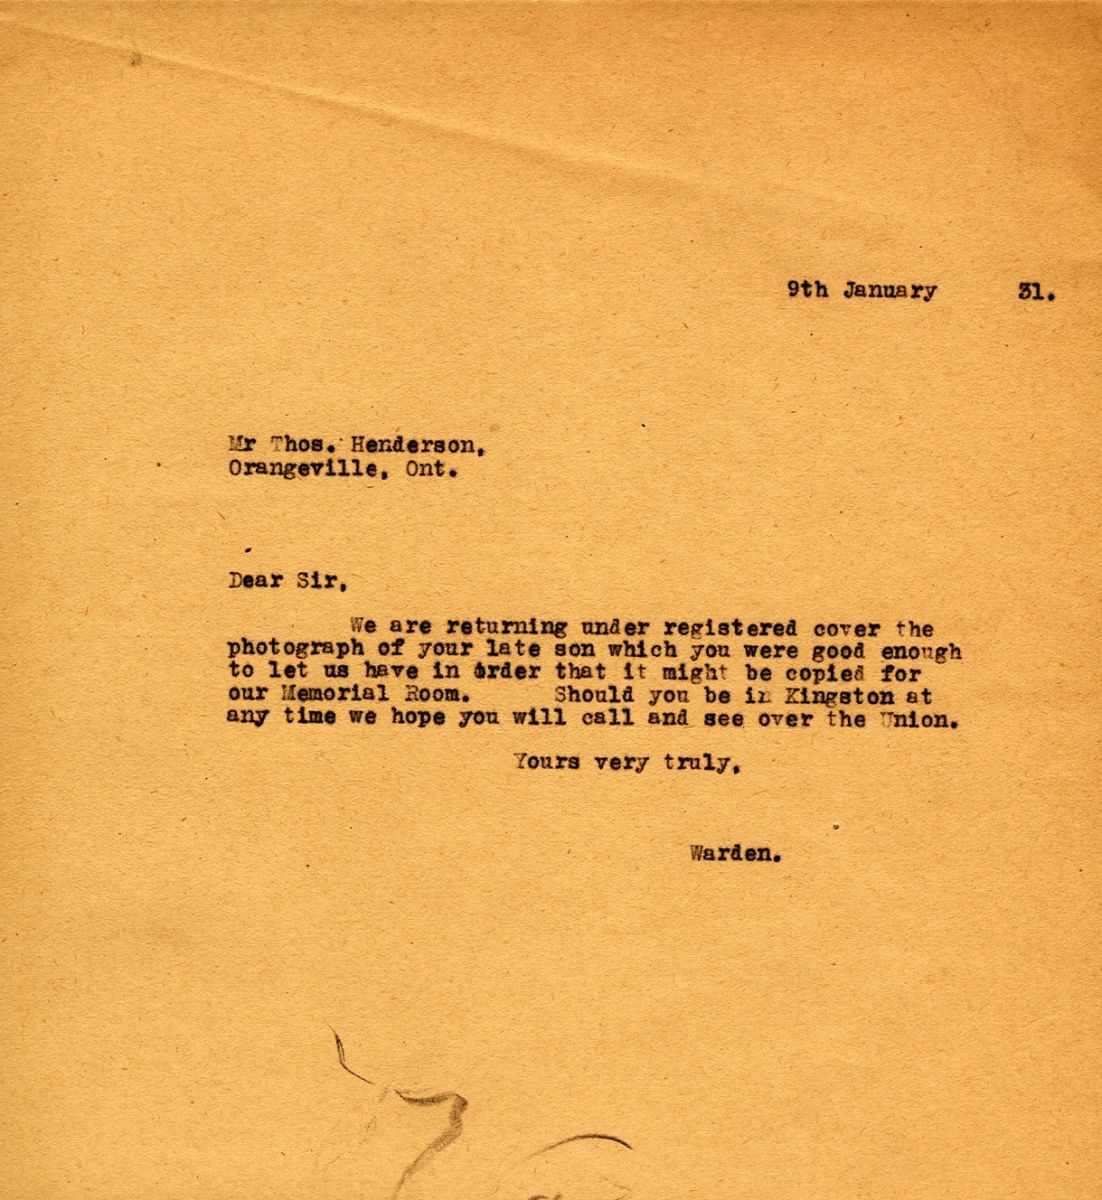 Letter from the Warden to Mr. Thos Henderson, 9th January 1931